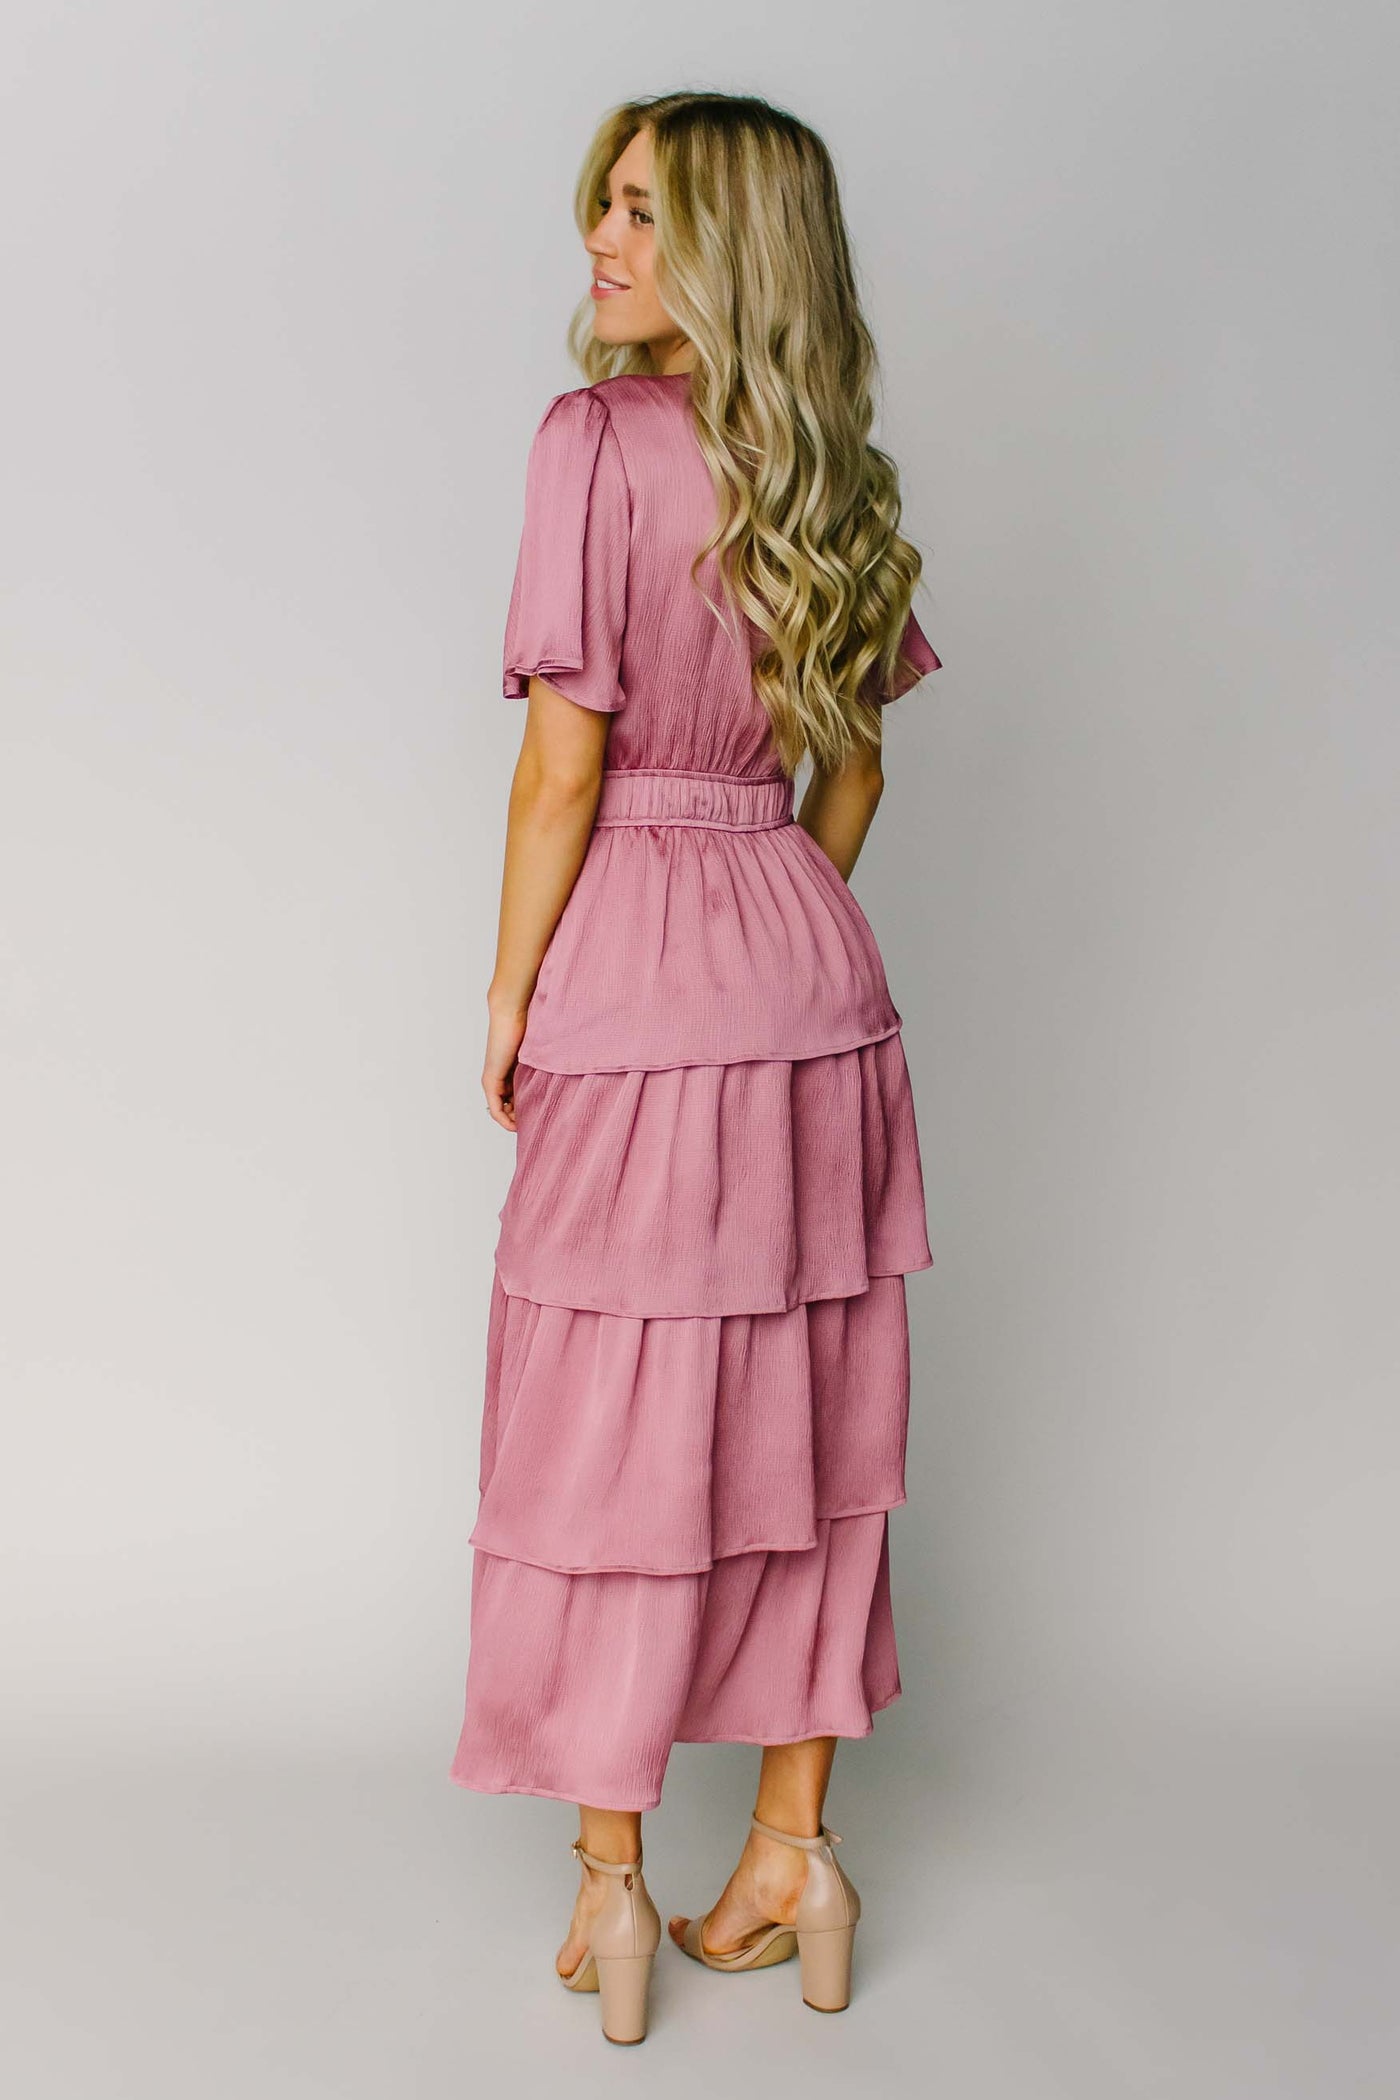 The back of a modest dress made out of a silky pink fabric, layered tiers, a keyhole, and a defined waist.